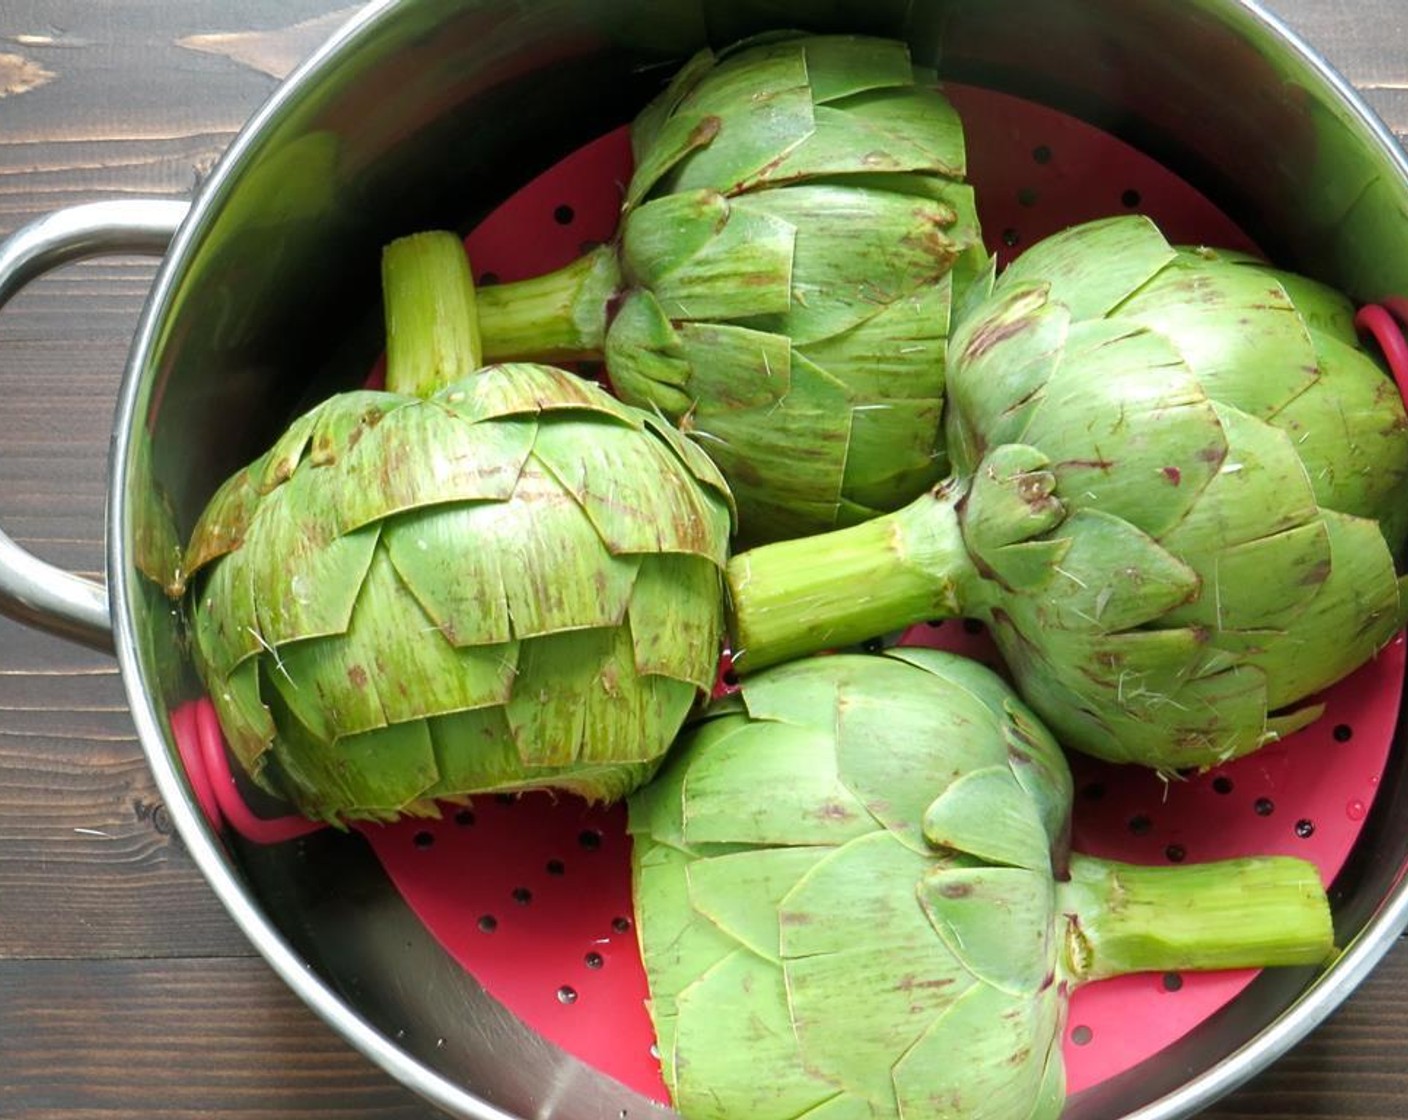 step 6 When the water is boiling, place the artichokes, cut side down onto the steaming tray and steam them for 25-40 minutes, depending on your artichoke. Check doneness by how easily one of the petals can be pulled from the bottom of the vegetable.